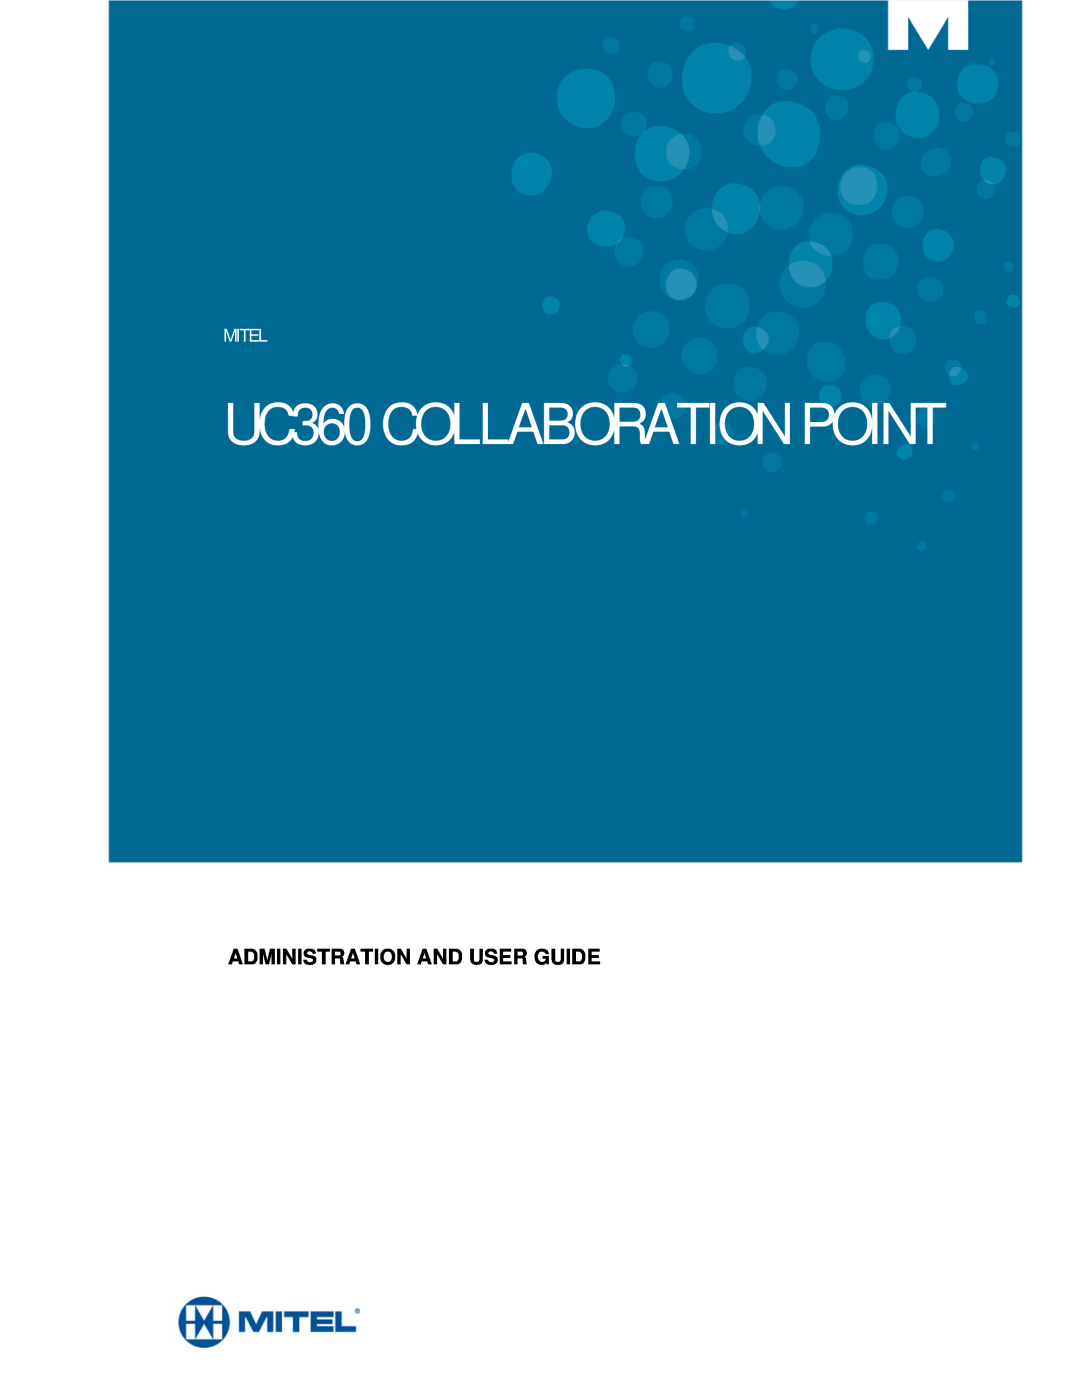 Mitel manual UC360 COLLABORATION POINT - QUICK REFERENCE GUIDE, Press Connect 